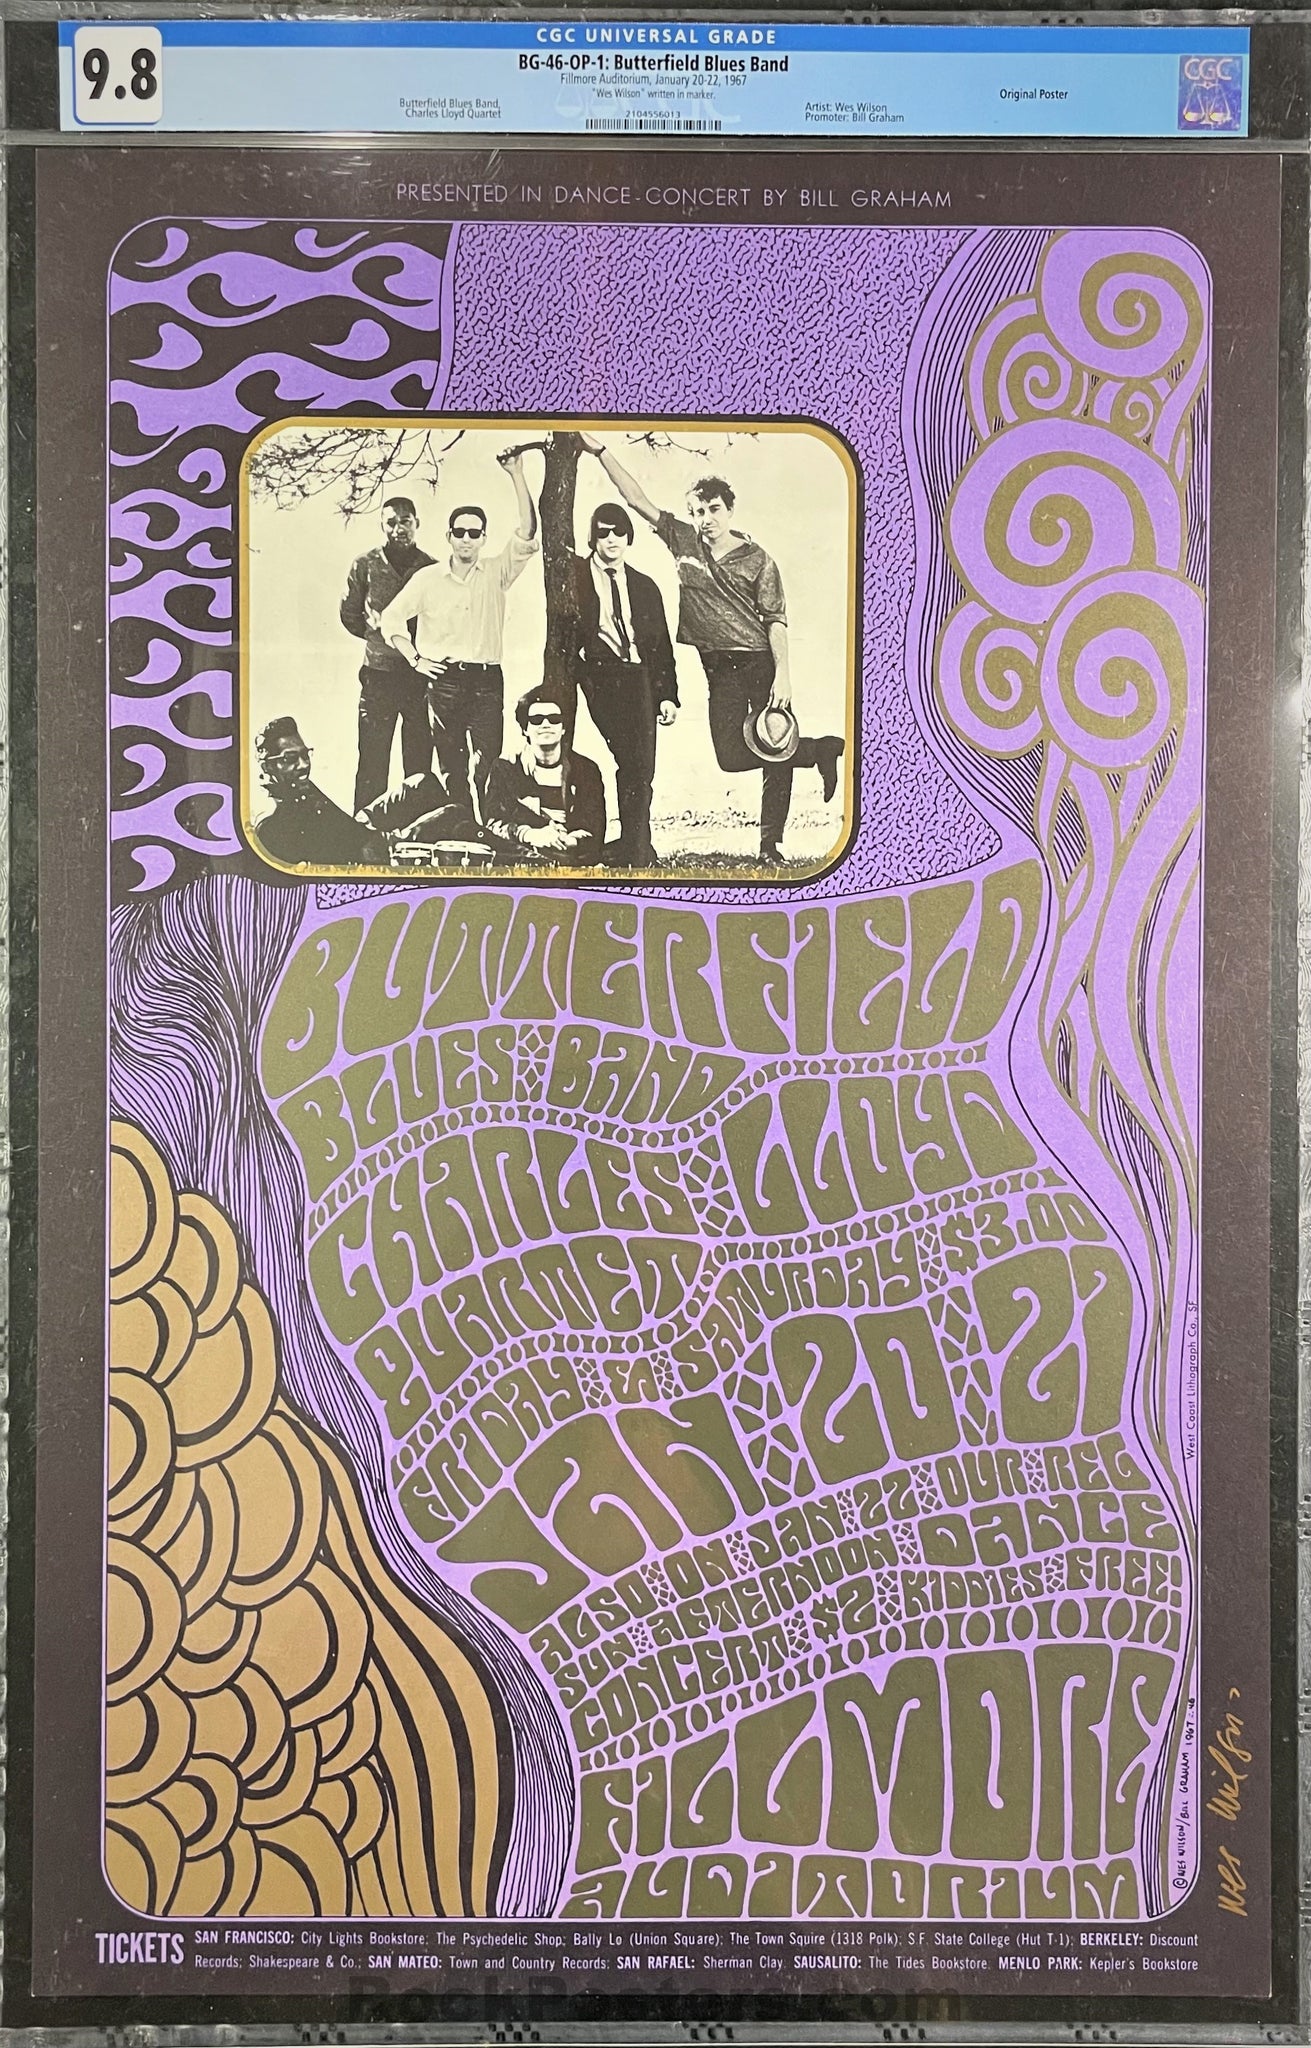 AUCTION -  BG-46 - Butterfield Blues Band - 1967 Poster - Wes Wilson Signed - Fillmore Auditorium - CGC Graded 9.8